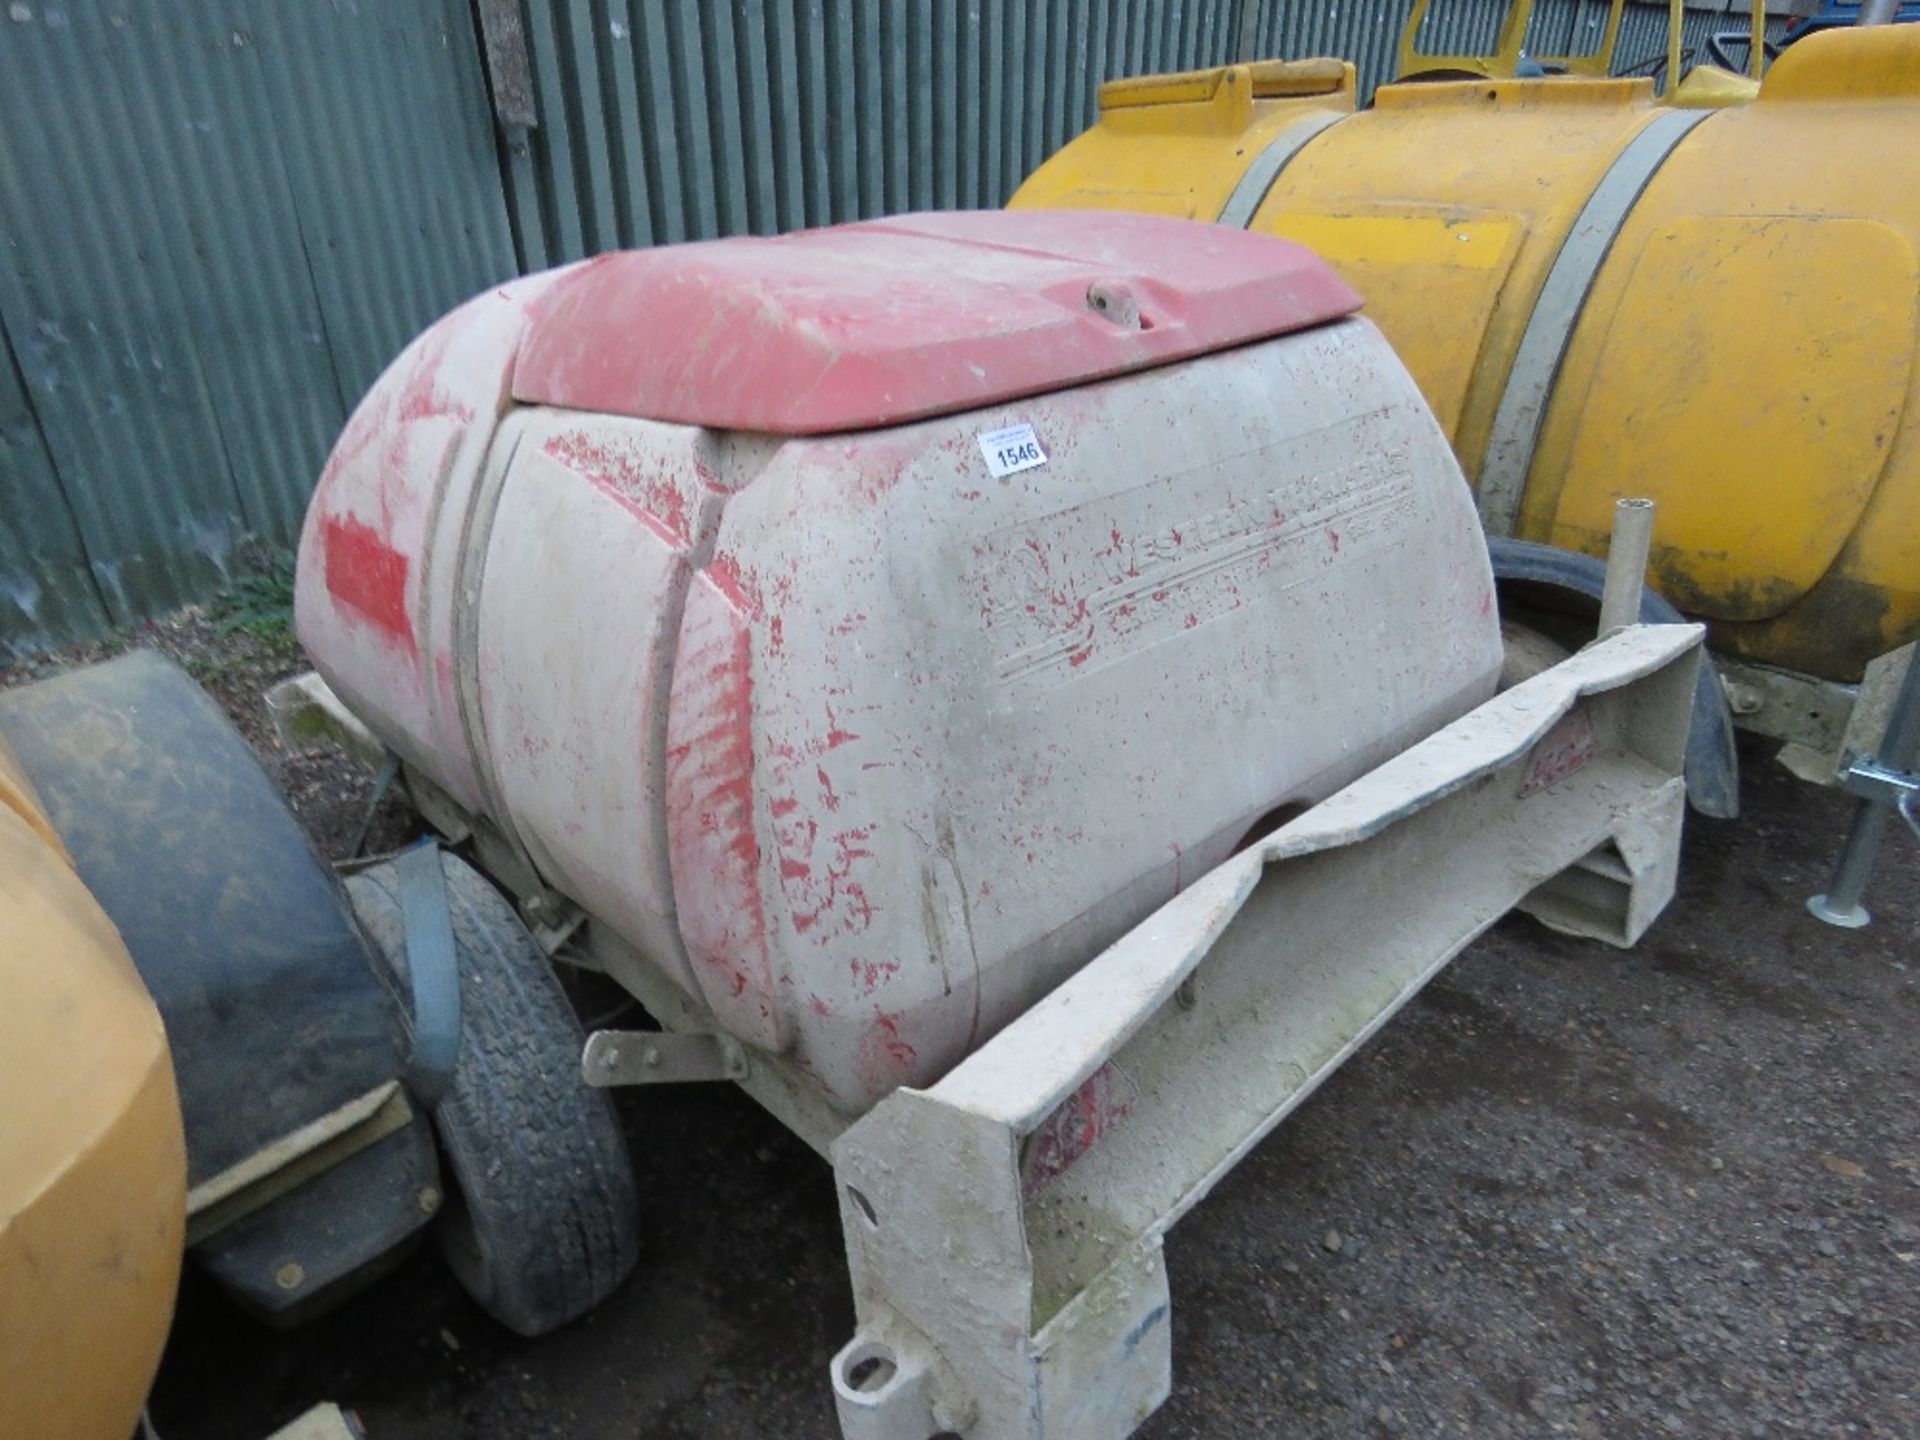 WESTERN SINGLE AXLED WATER BOWSER WITH LONG NECK TO HOUSE PRESSURE WASHER ETC. - Image 2 of 5